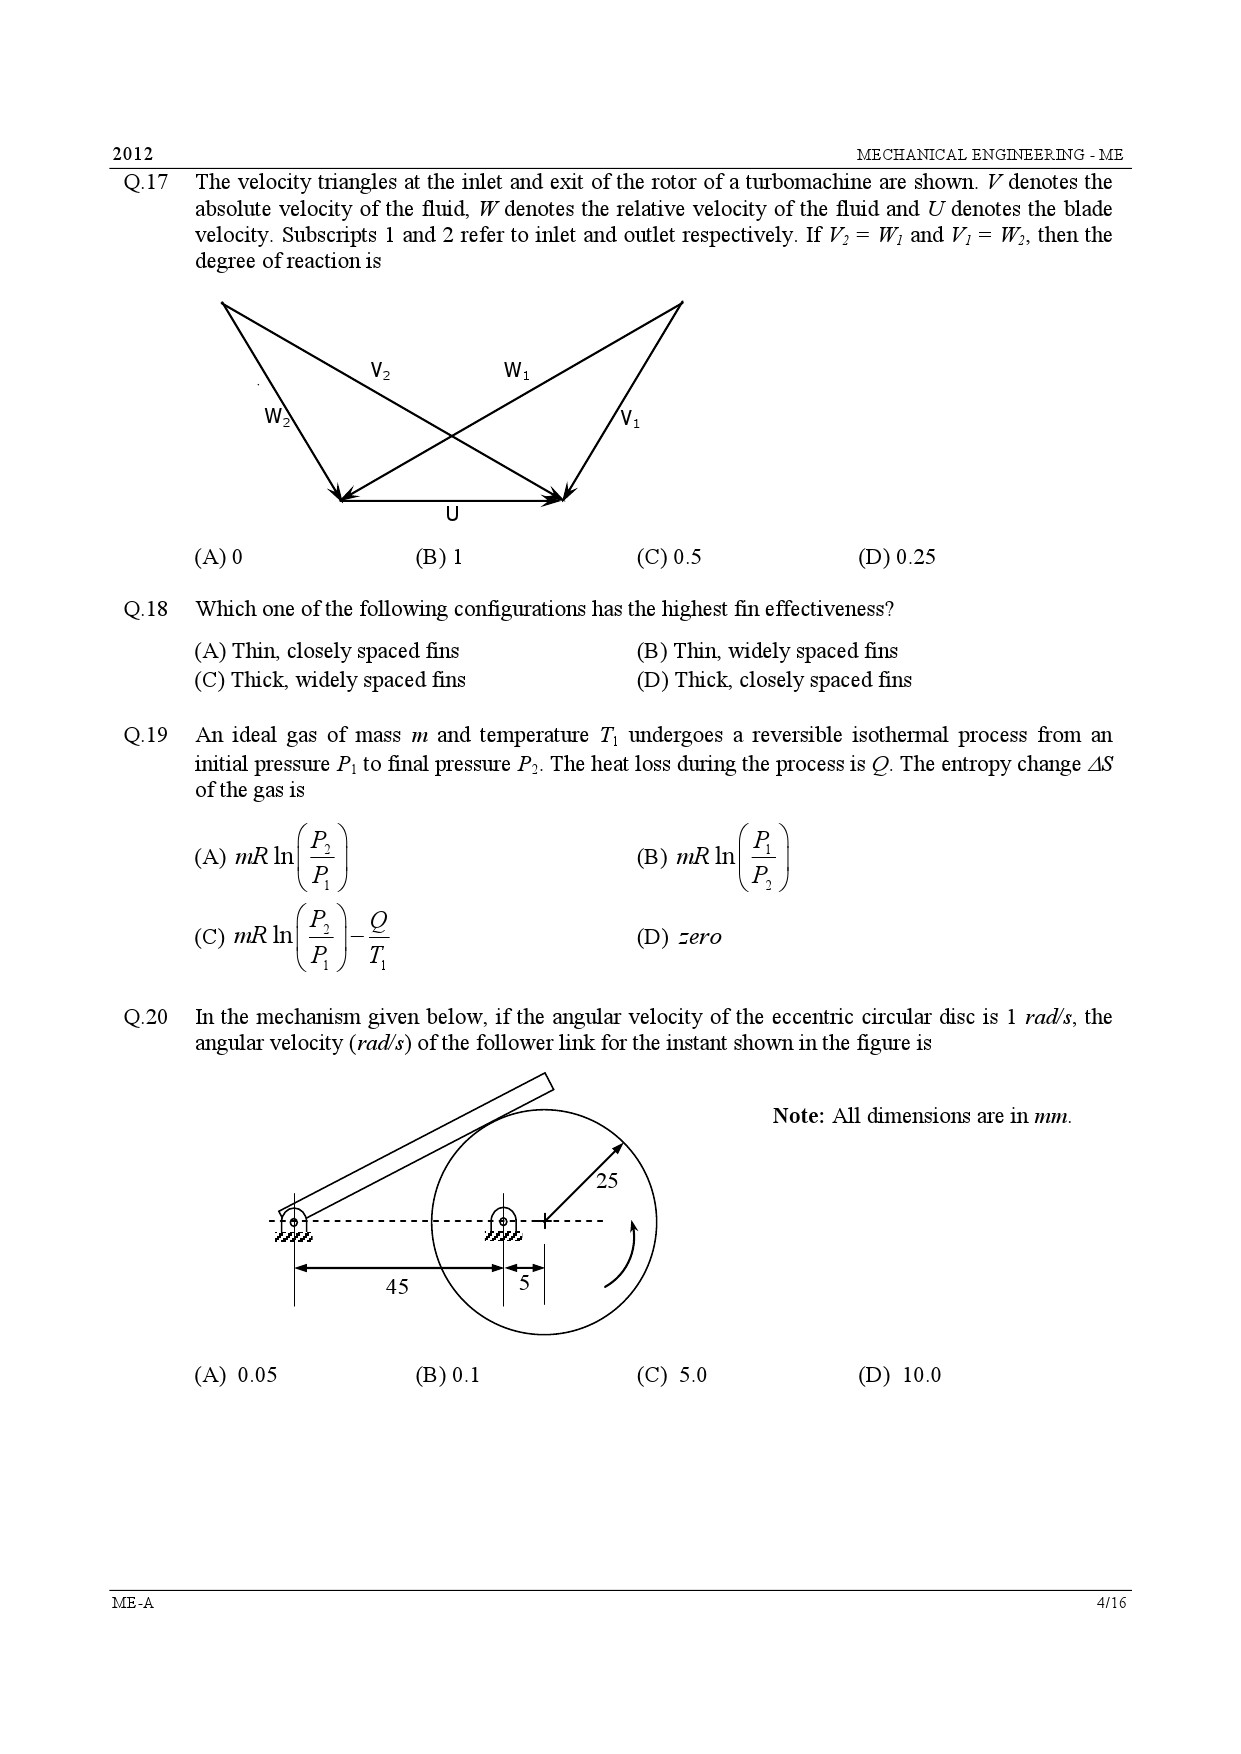 GATE Exam Question Paper 2012 Mechanical Engineering 4